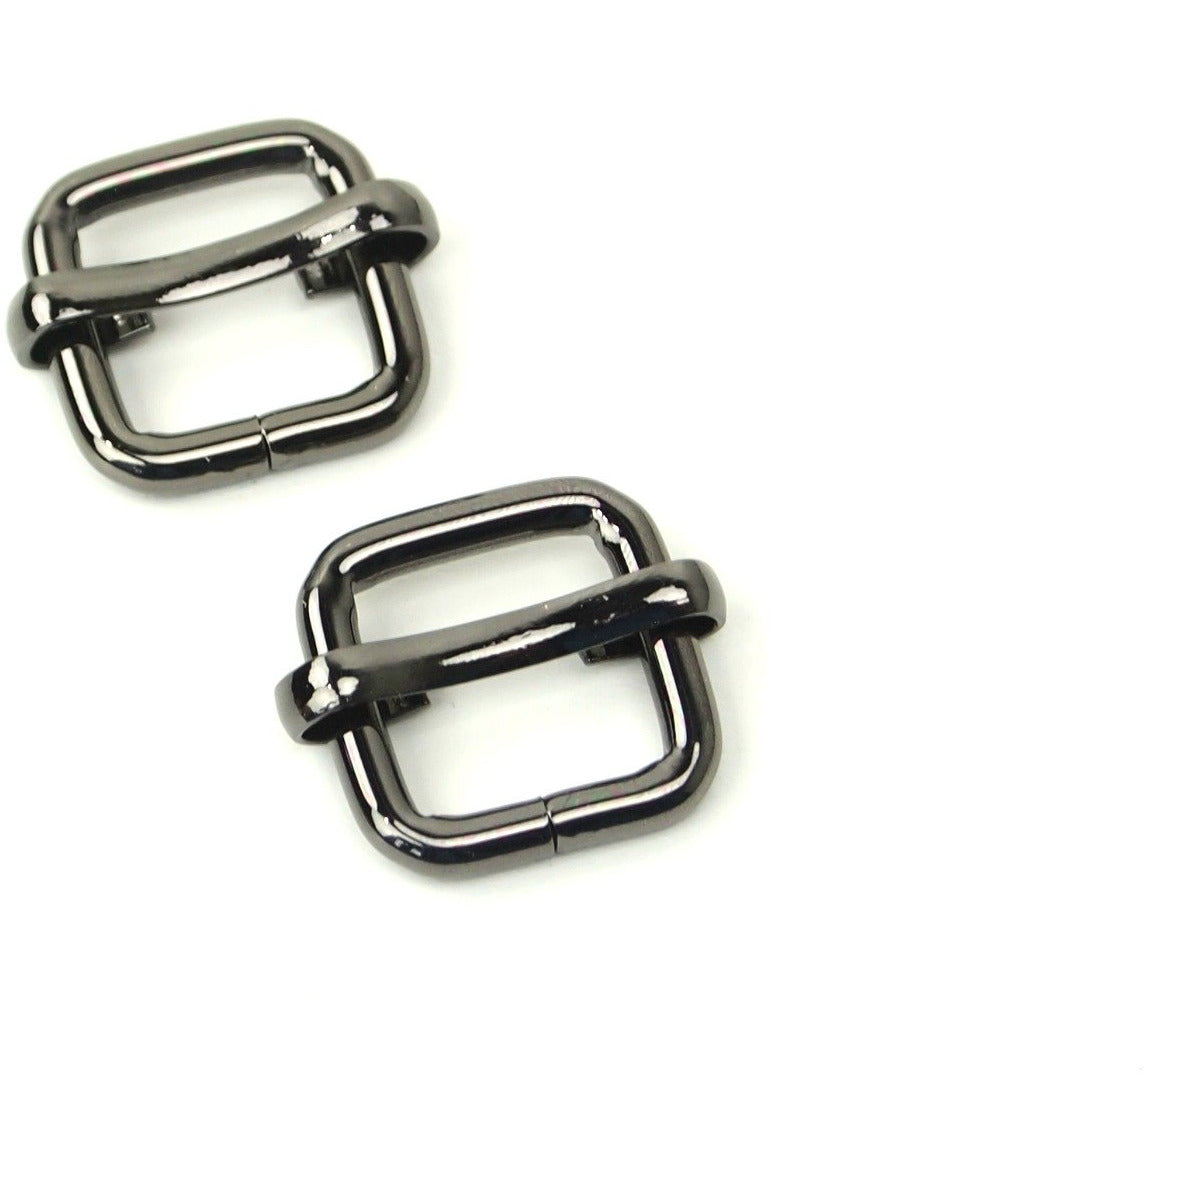 Two 1/2" Slider Buckles